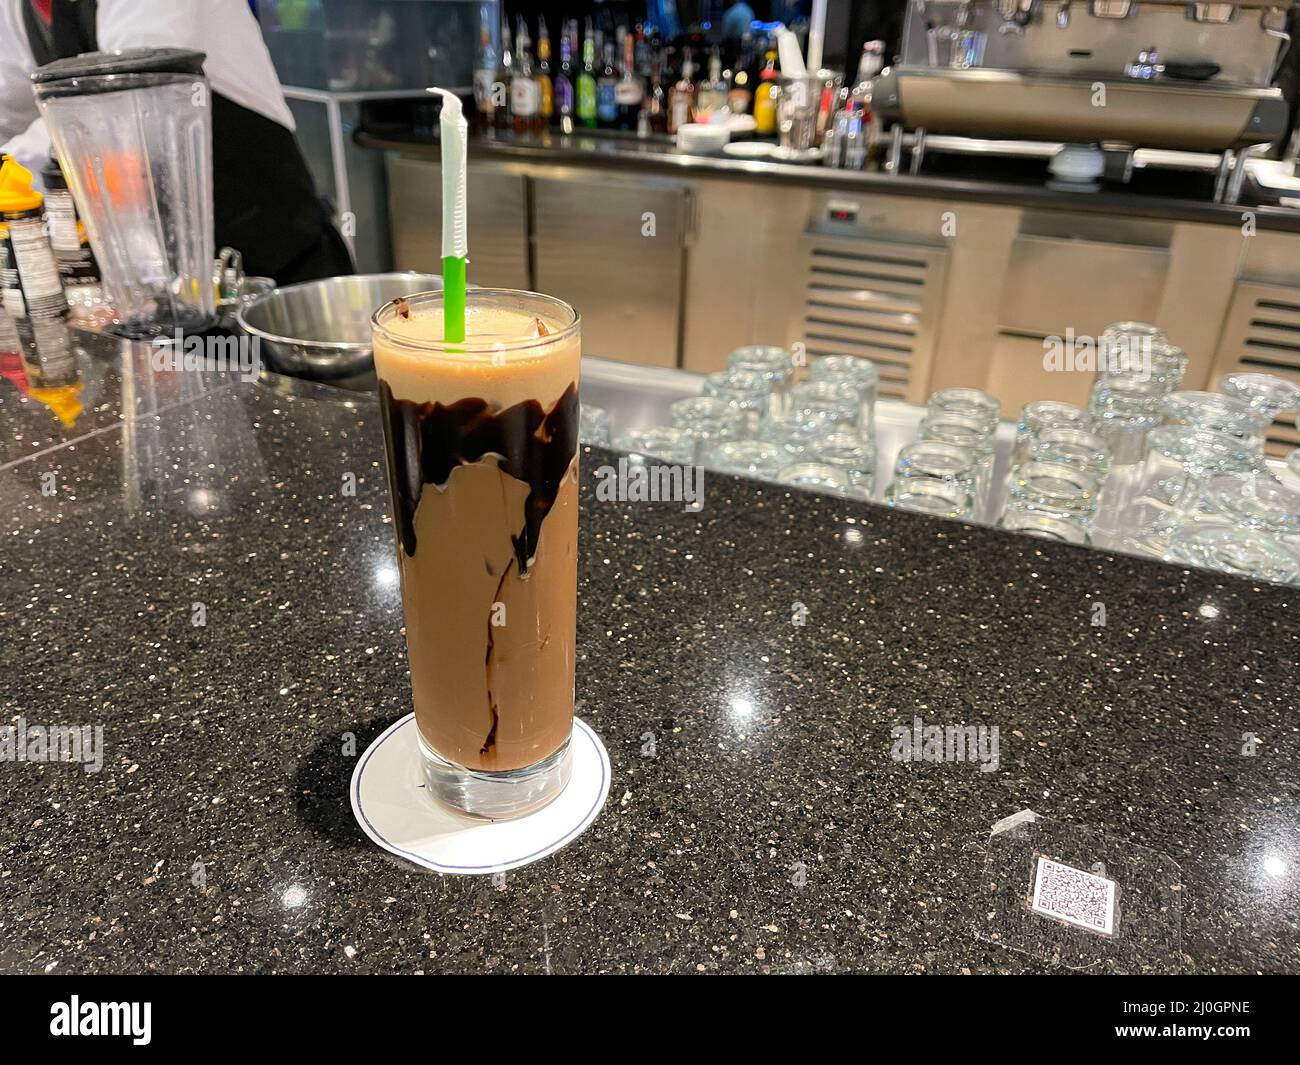 orlando, FL USA - October 11, 2021:  A delicious iced chocolate latte served on the MSC Cruise Ship Divina in Port Canaveral, Florida., Stock Photo